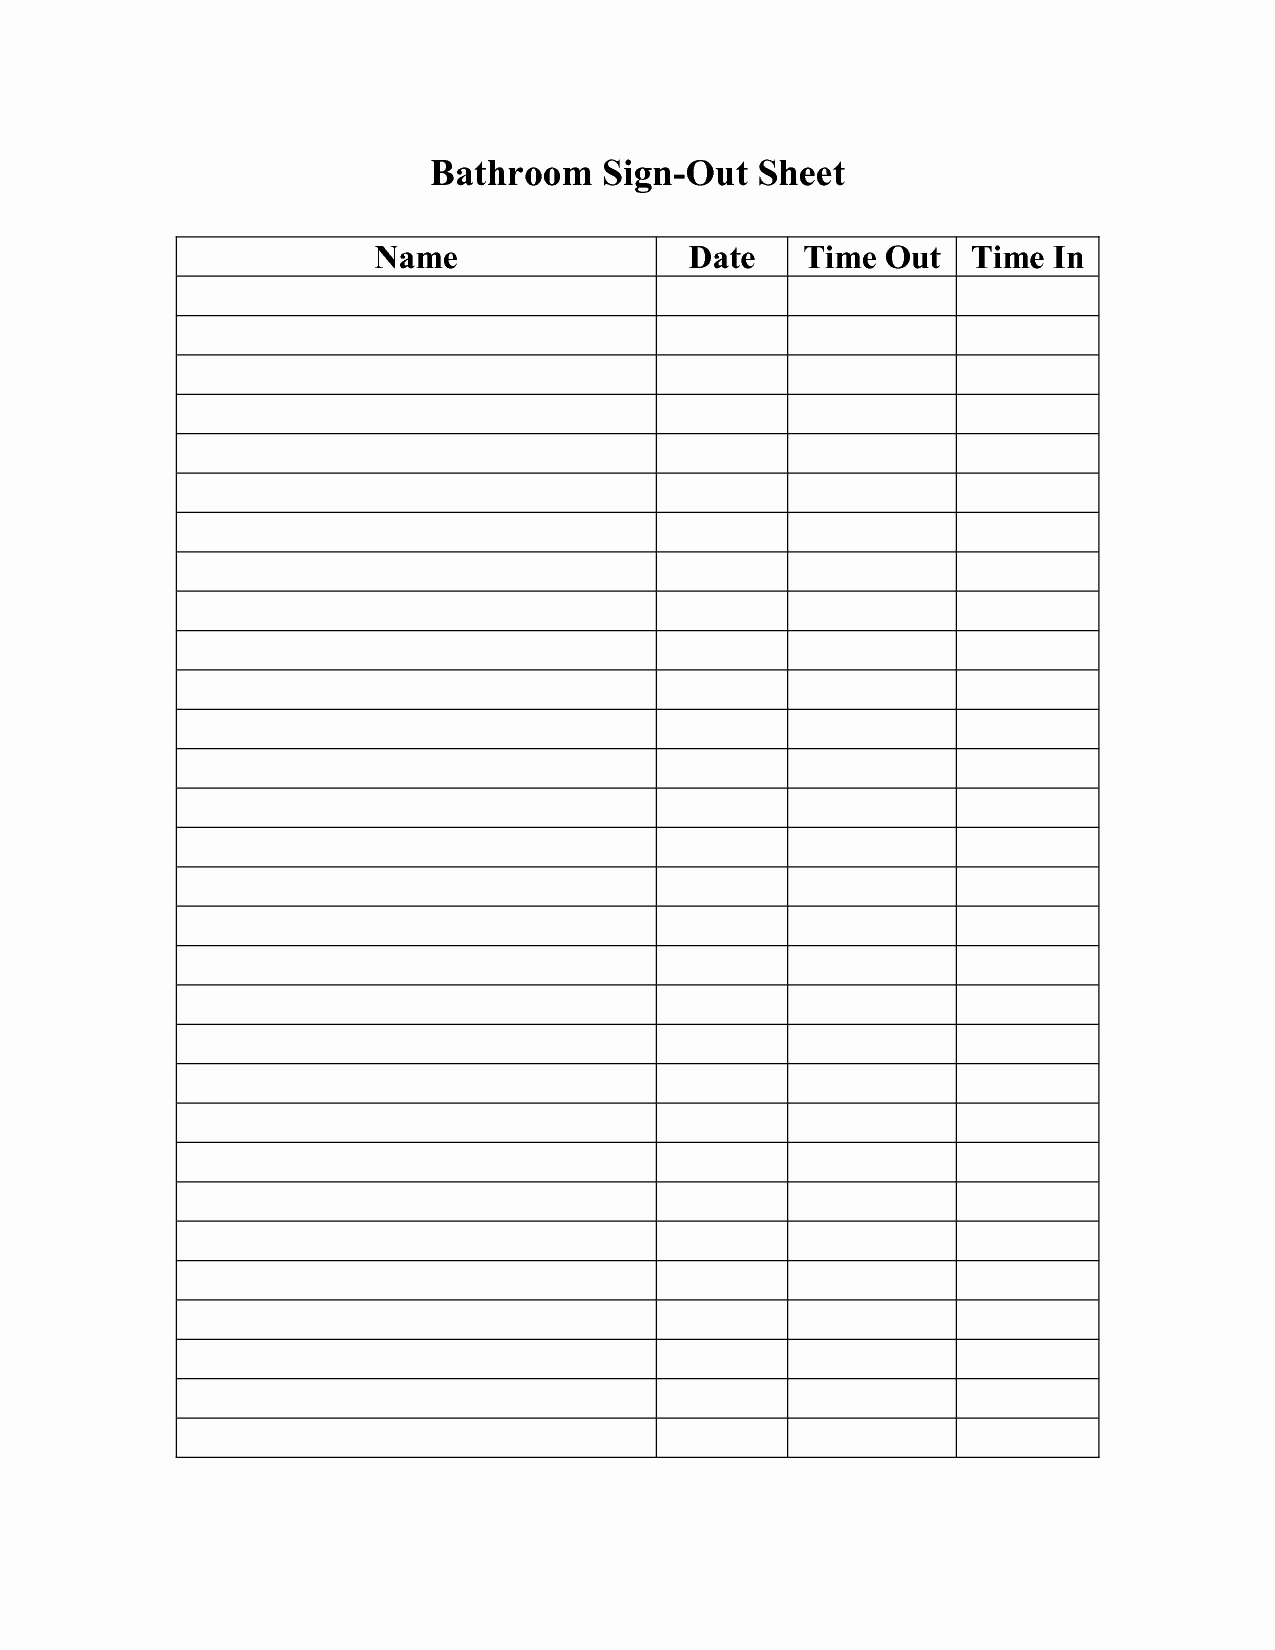 Credit Card Sign Out Sheet Fresh 6 Best Of Bathroom Sign Out Sheet Printable